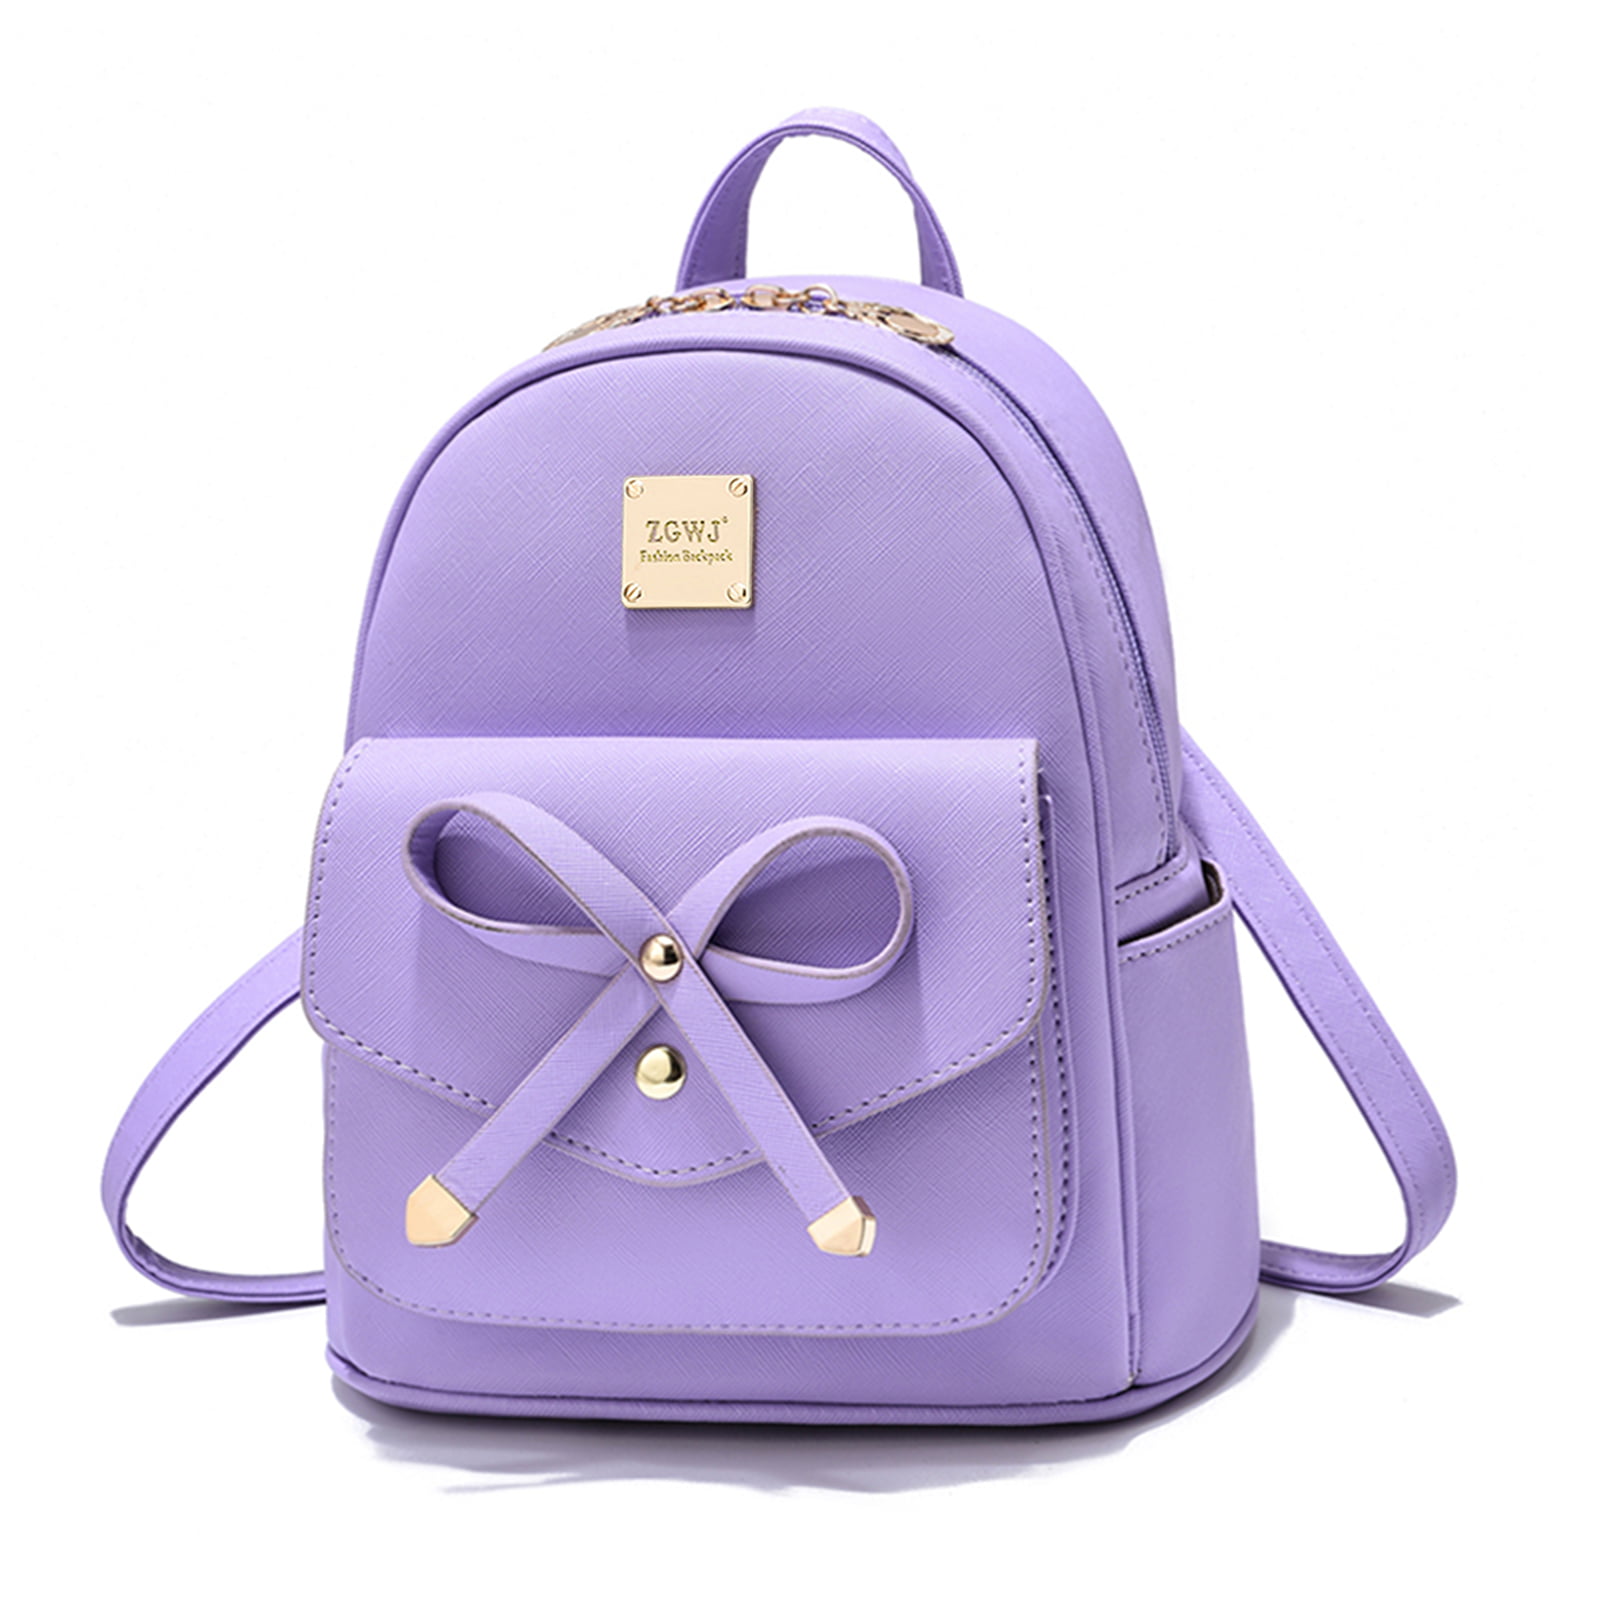 ZGWJ Mini Leather Backpack Purse Bowknot Small Backpack Cute Casual Travel Daypacks for Girls Women 3-Pieces 